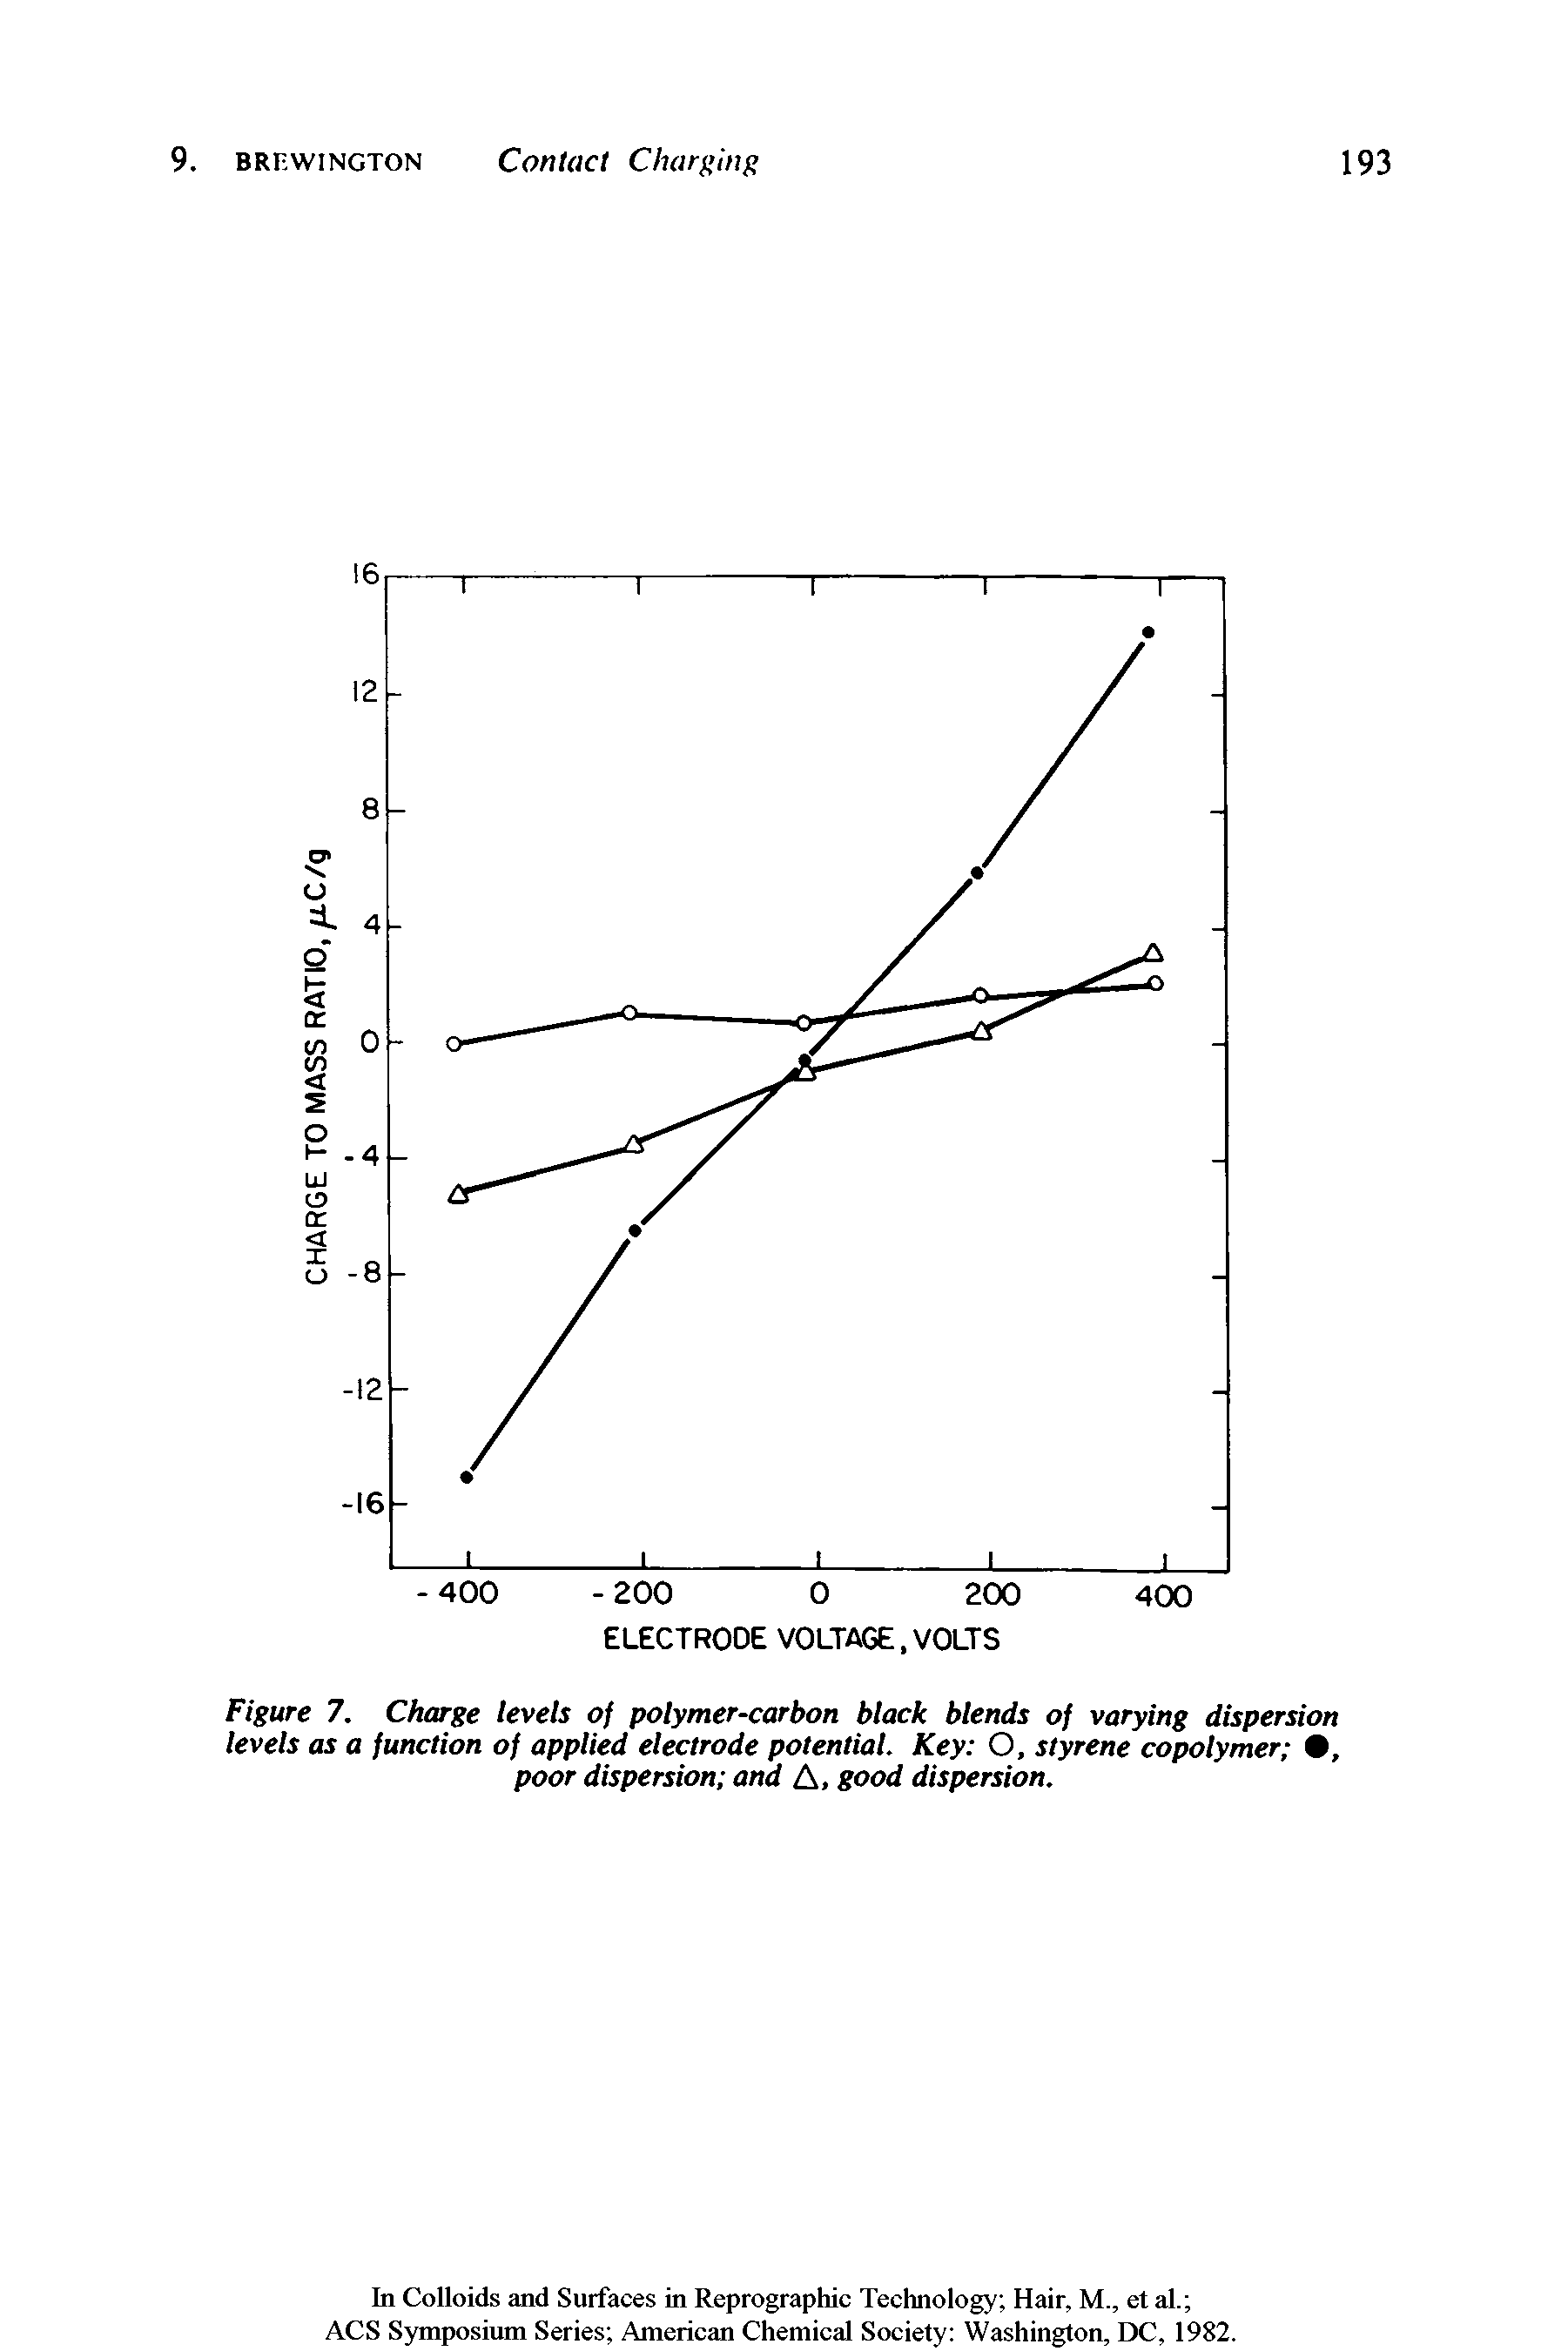 Figure 7. Charge levels of polymer-carbon black blends of varying dispersion levels as a function of applied electrode potential. Key O, styrene copolymer , poor dispersion and A, good dispersion.